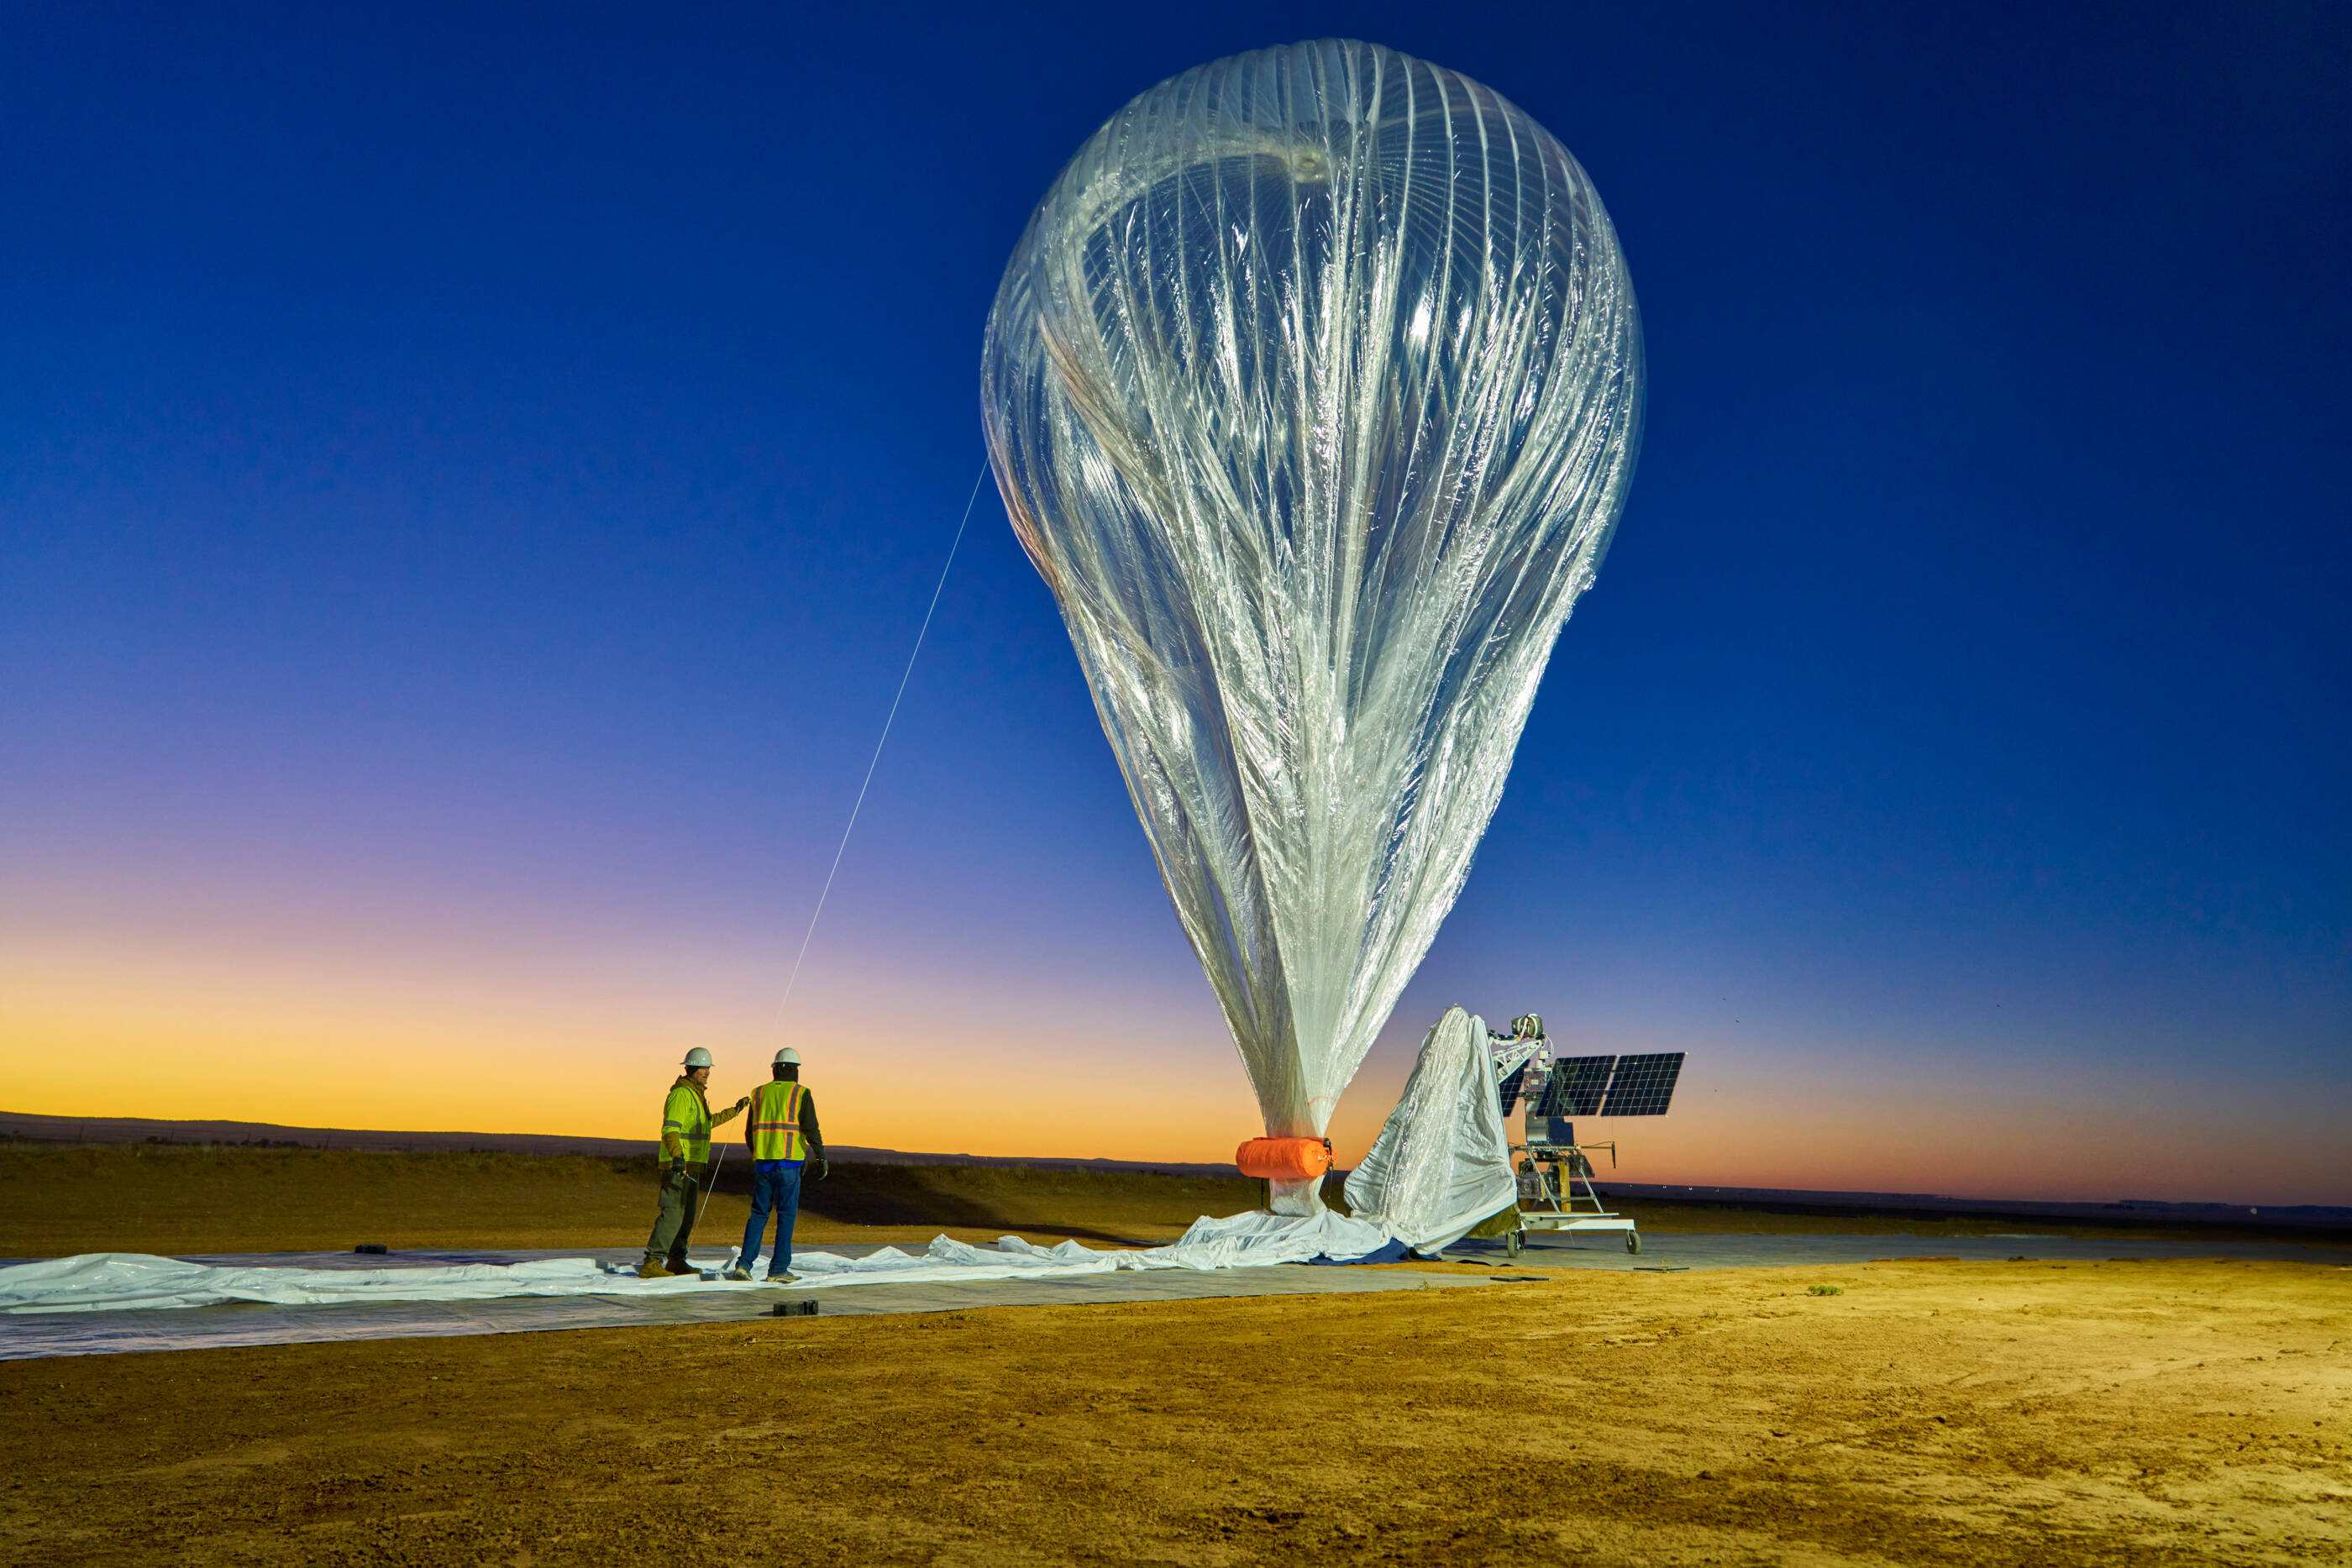 Hovering at approximately 60,000 feet, the stratospheric balloon we launched in the Permian uses advanced imaging technology and data processing platforms to detect methane emissions over a vast area.